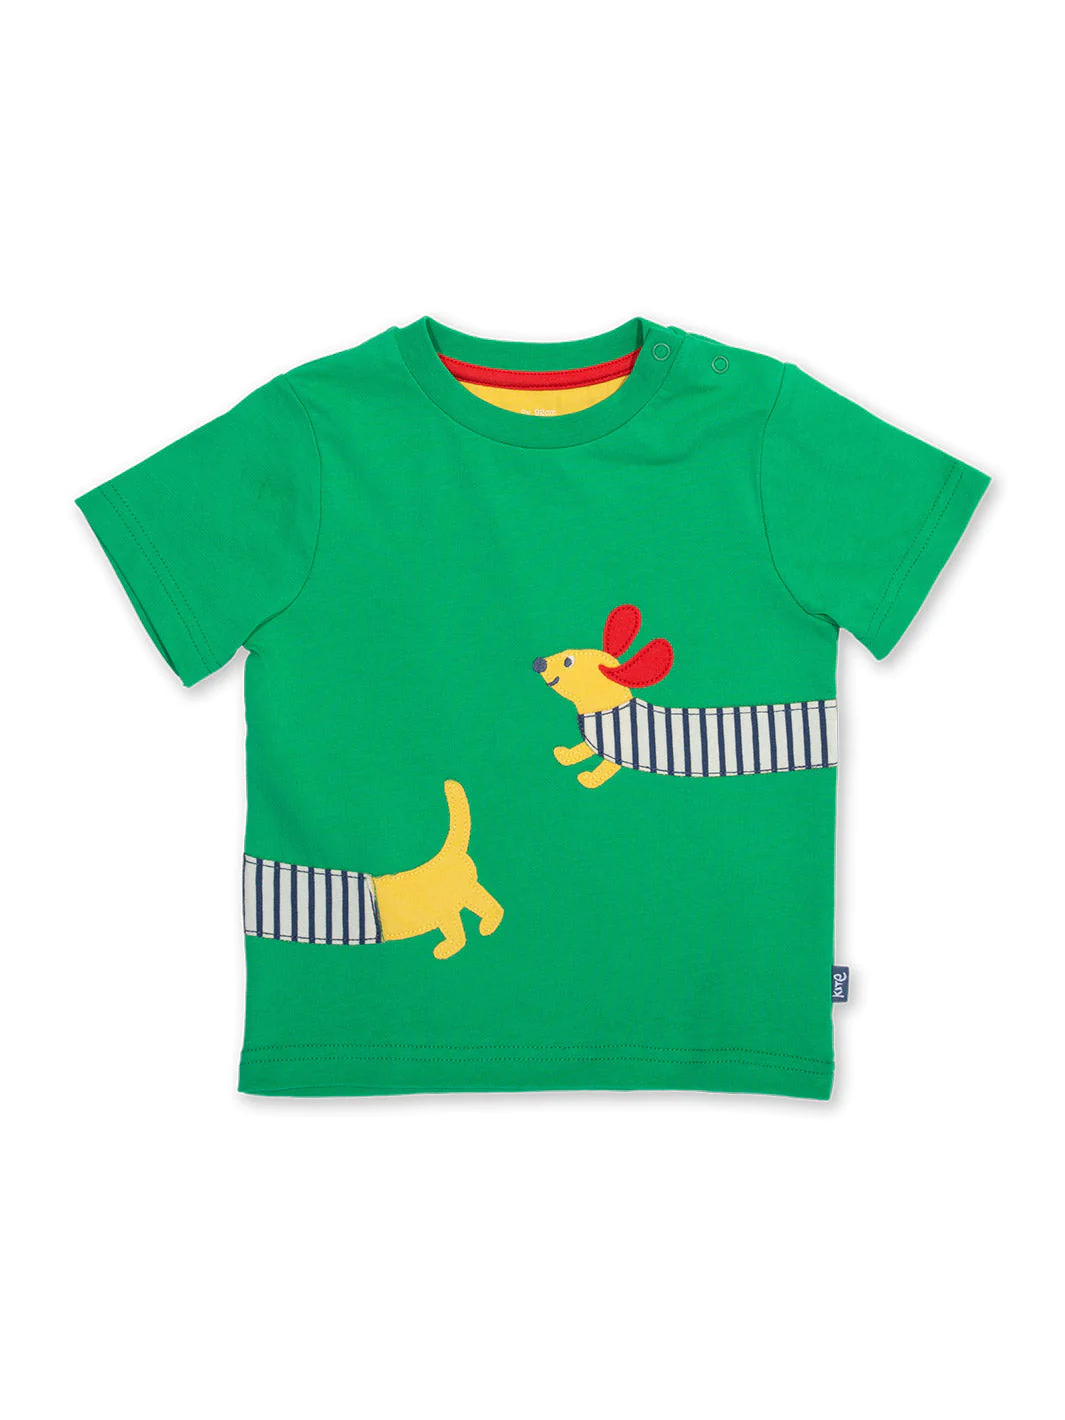 Silly Sausage T-Shirt by Kite